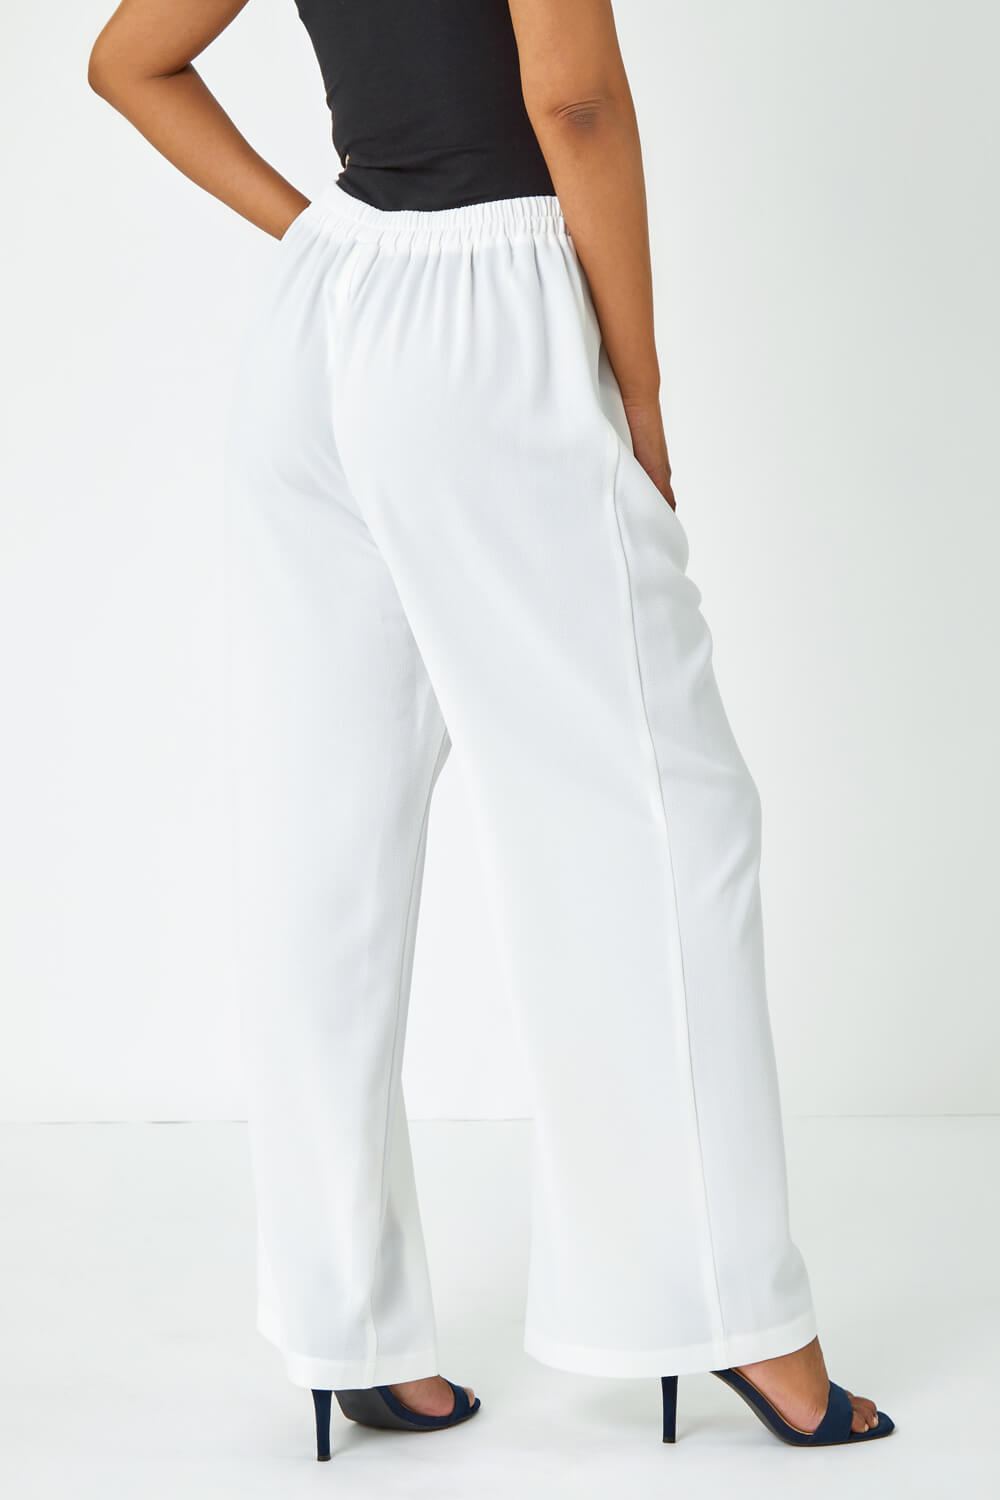 Ivory  Petite Wide Leg Stretch Trousers, Image 3 of 6